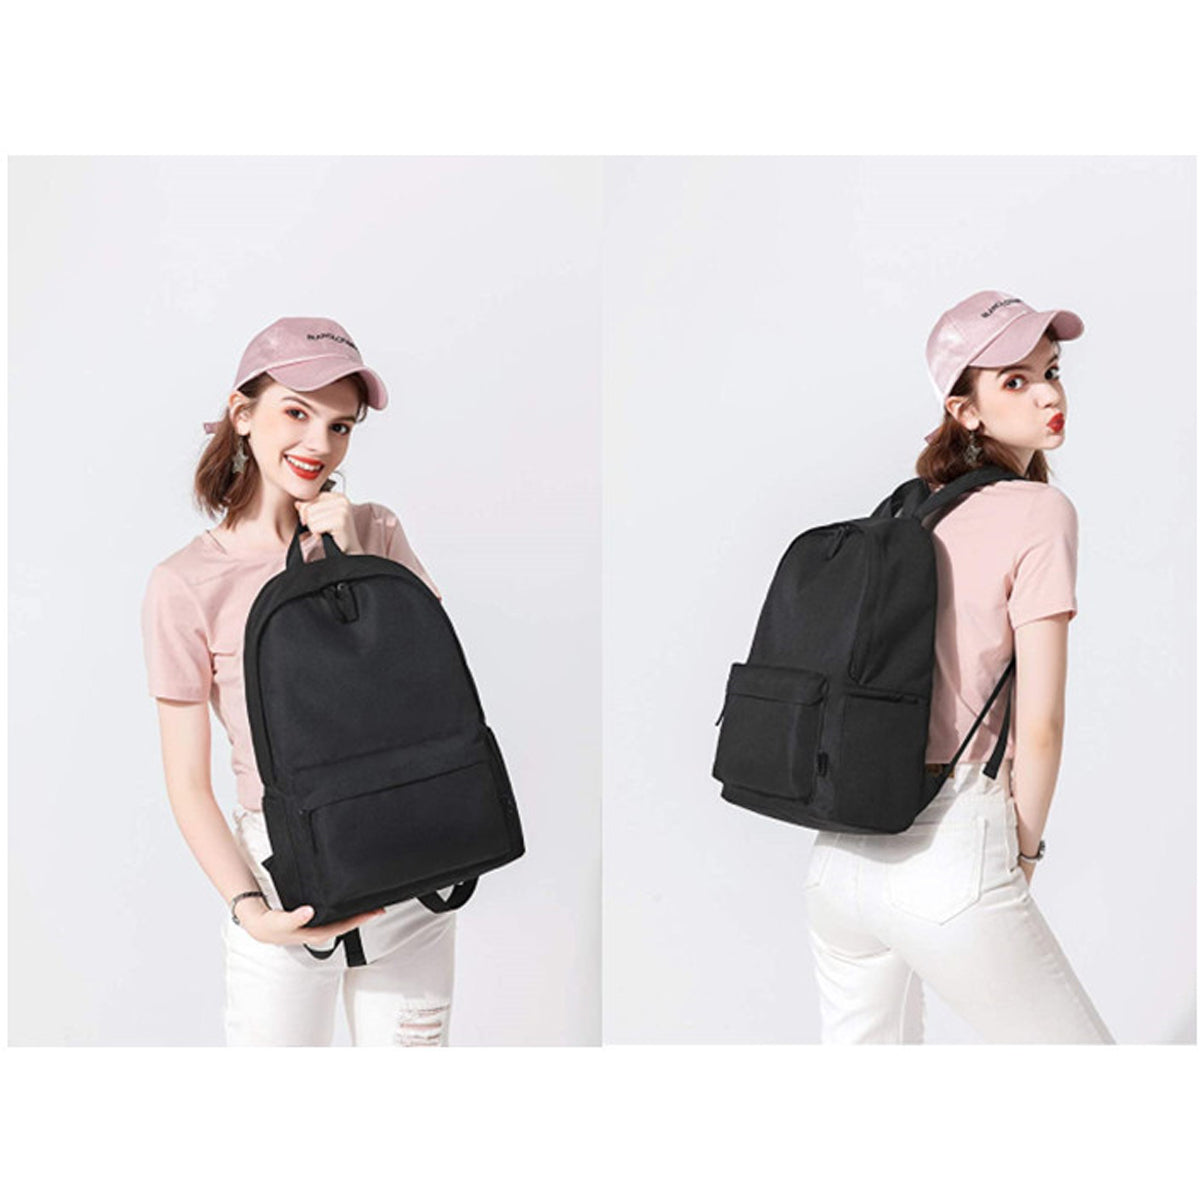 Lightweight Casual Unisex Backpack for School